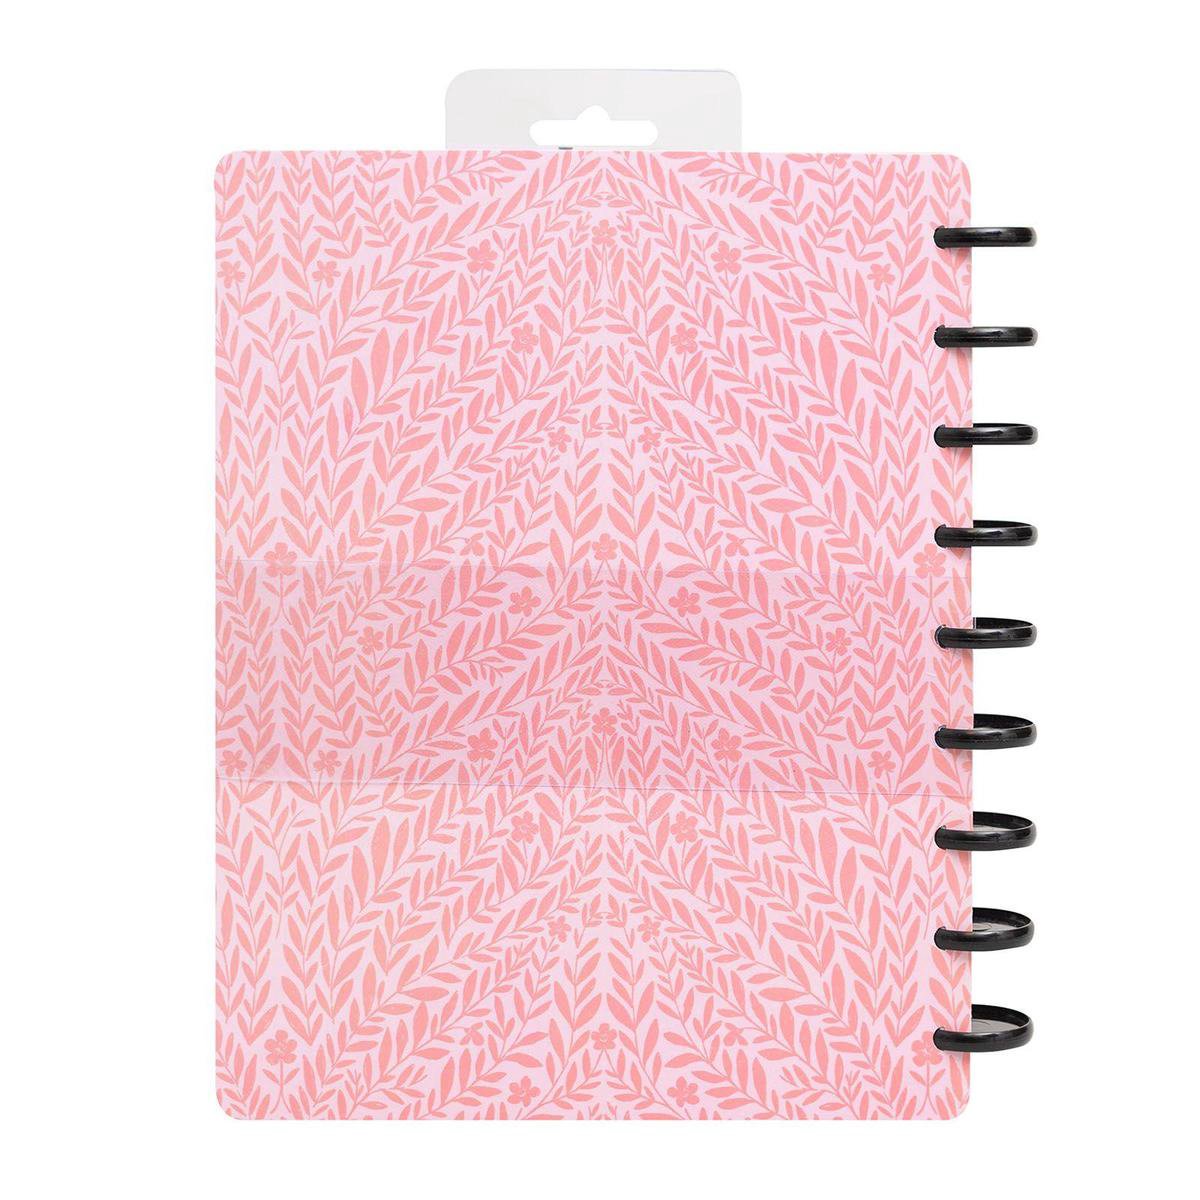 Crate Paper Day-to-Day DIY Planner - Dashboard - Pink vines - 99 stuks